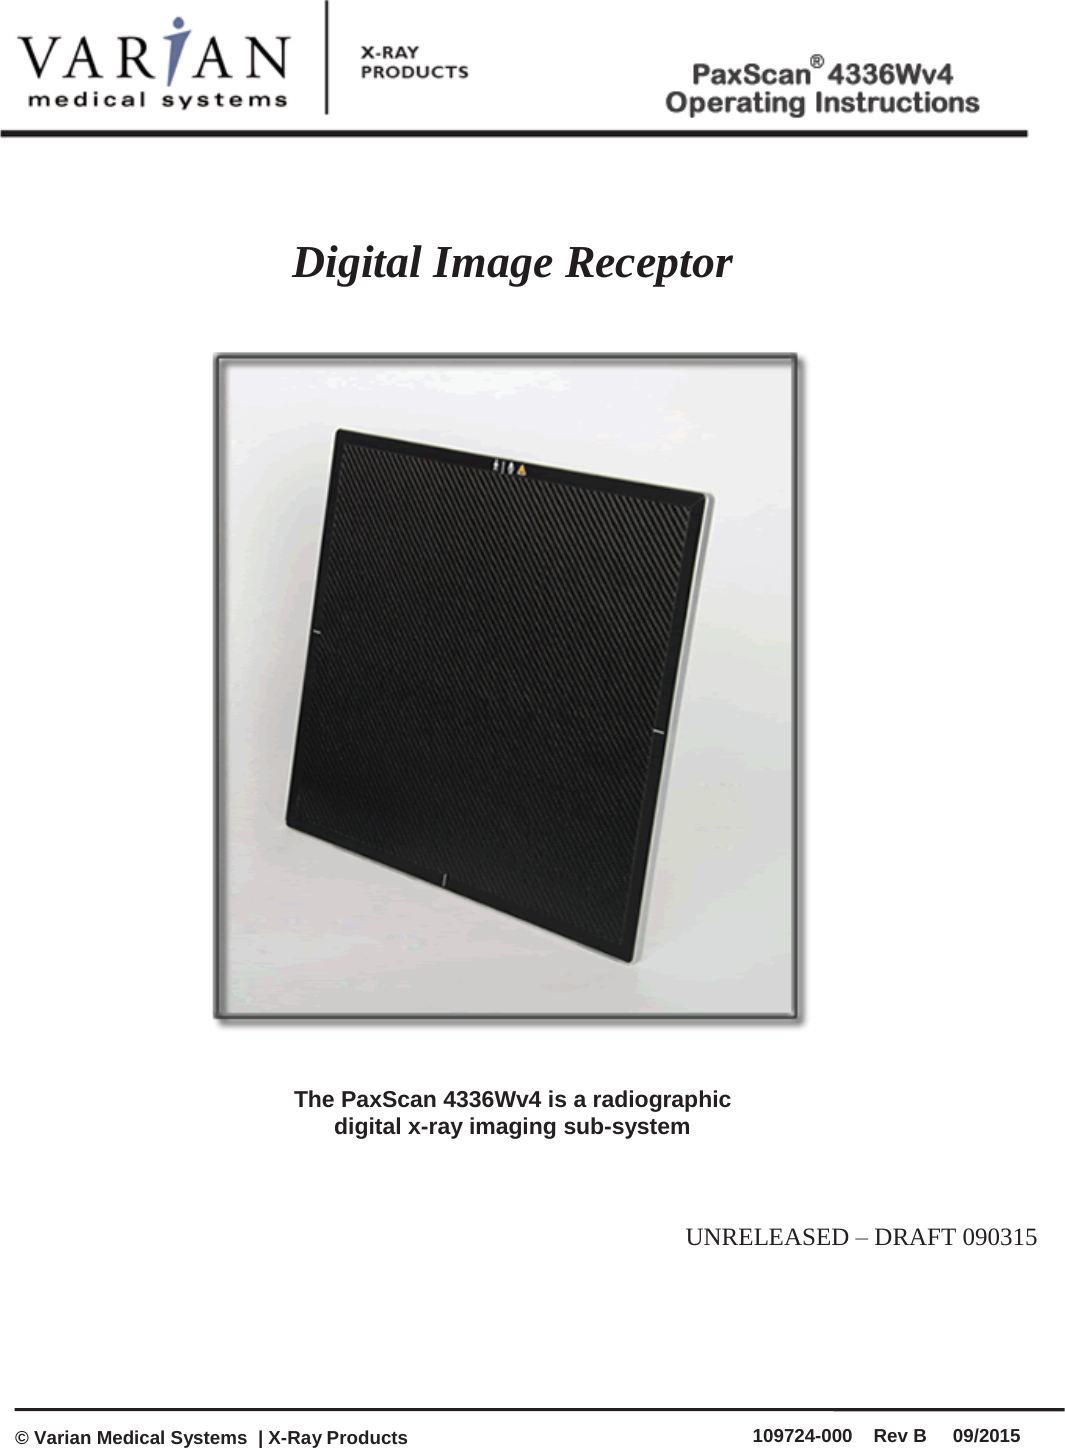     Digital Image Receptor     The PaxScan 4336Wv4 is a radiographic  digital x-ray imaging sub-system    UNRELEASED – DRAFT 090315     © Varian Medical Systems  | X-Ray Products 109724-000    Rev B     09/2015 